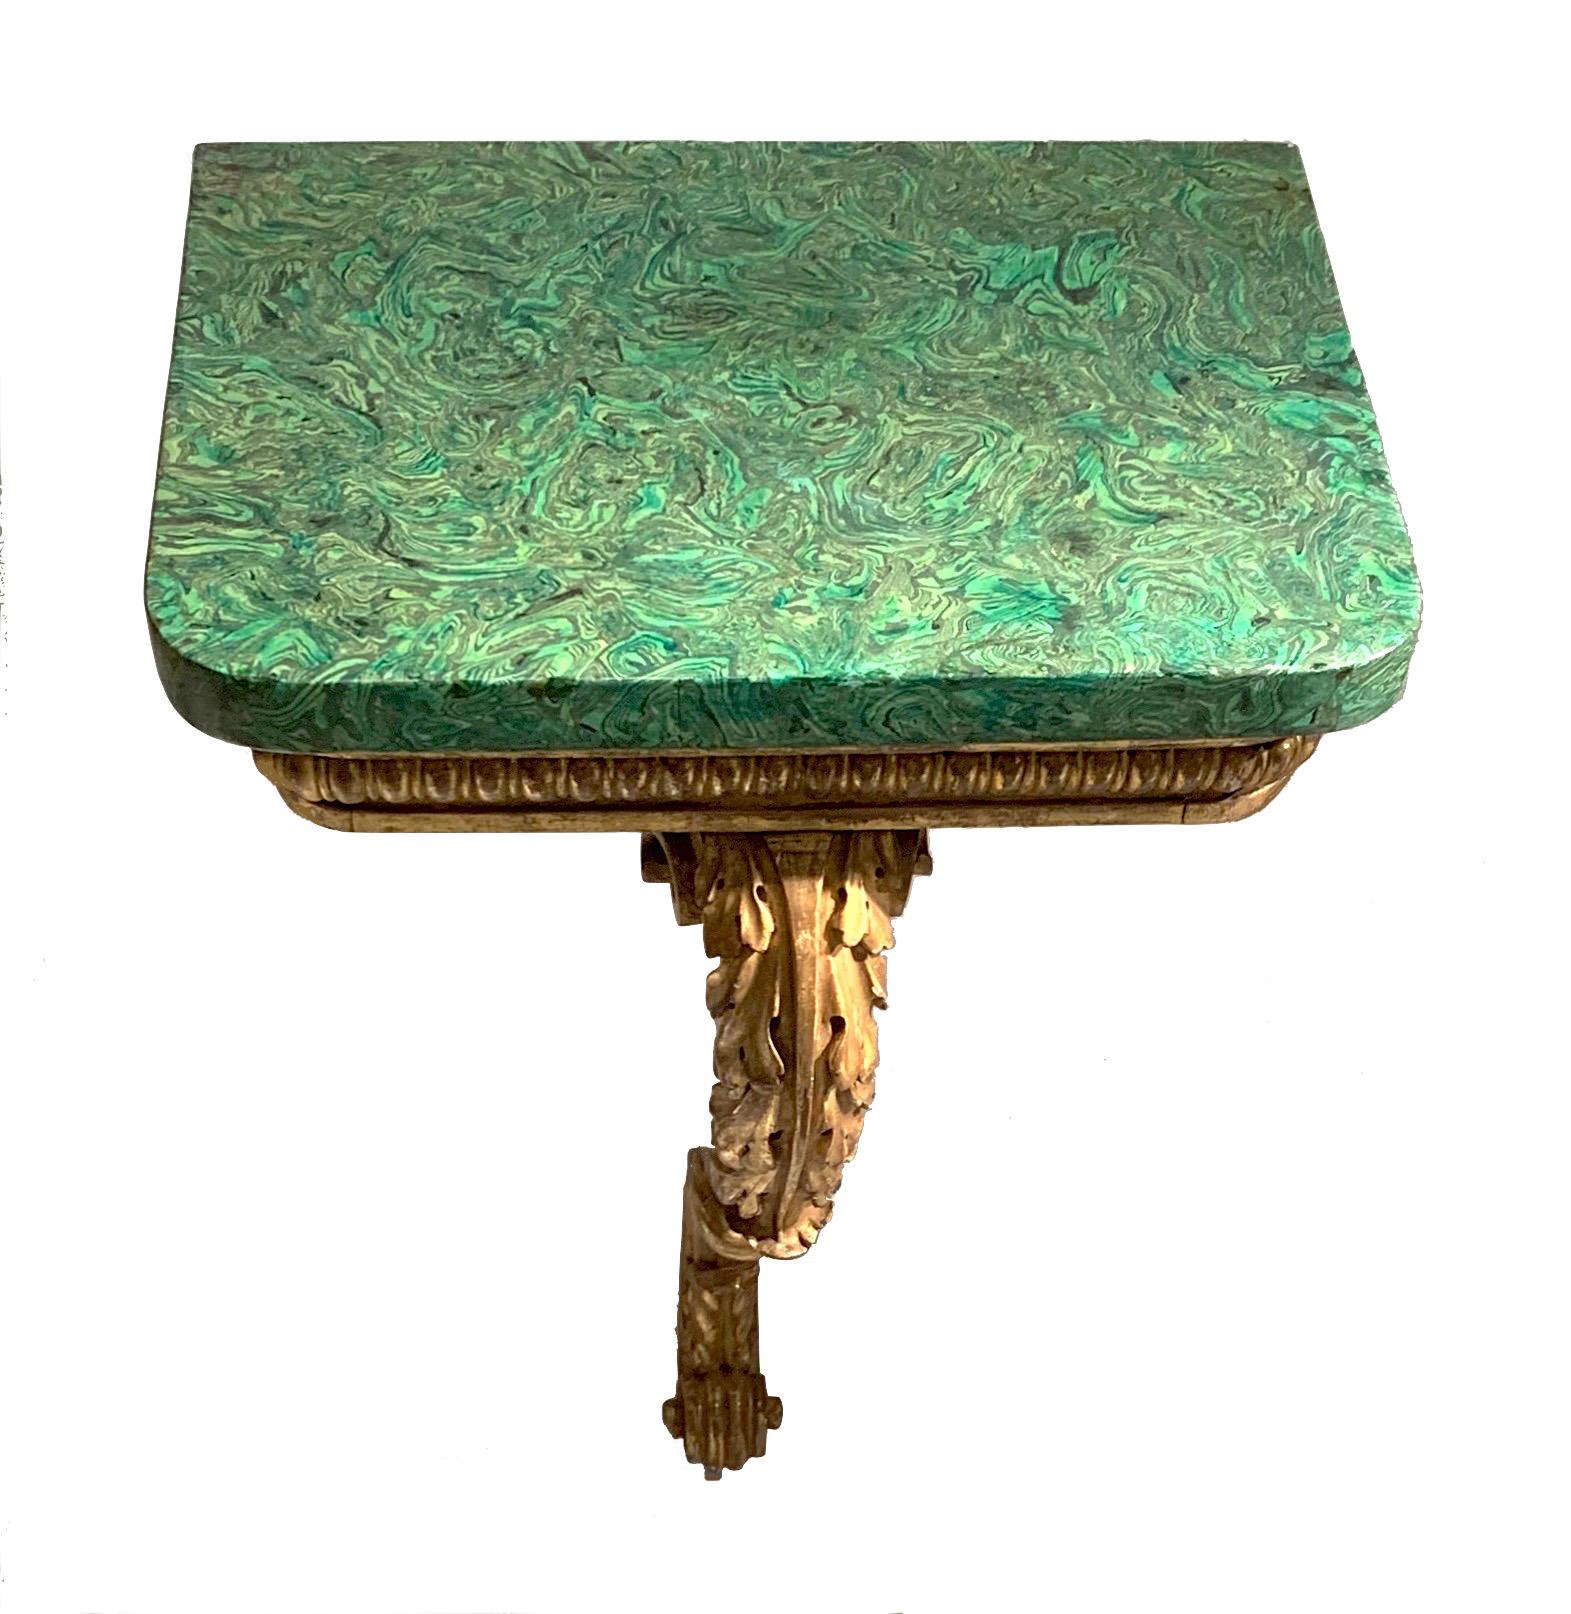 Pair of small console tables - England, circa 1810, Regency - are made out of finely carved and gilt beechwood. The tops are made in Scagliola technique and painted like malachite. 
They are signed 'F. Matthews Ann Street Brighton'.
Size table